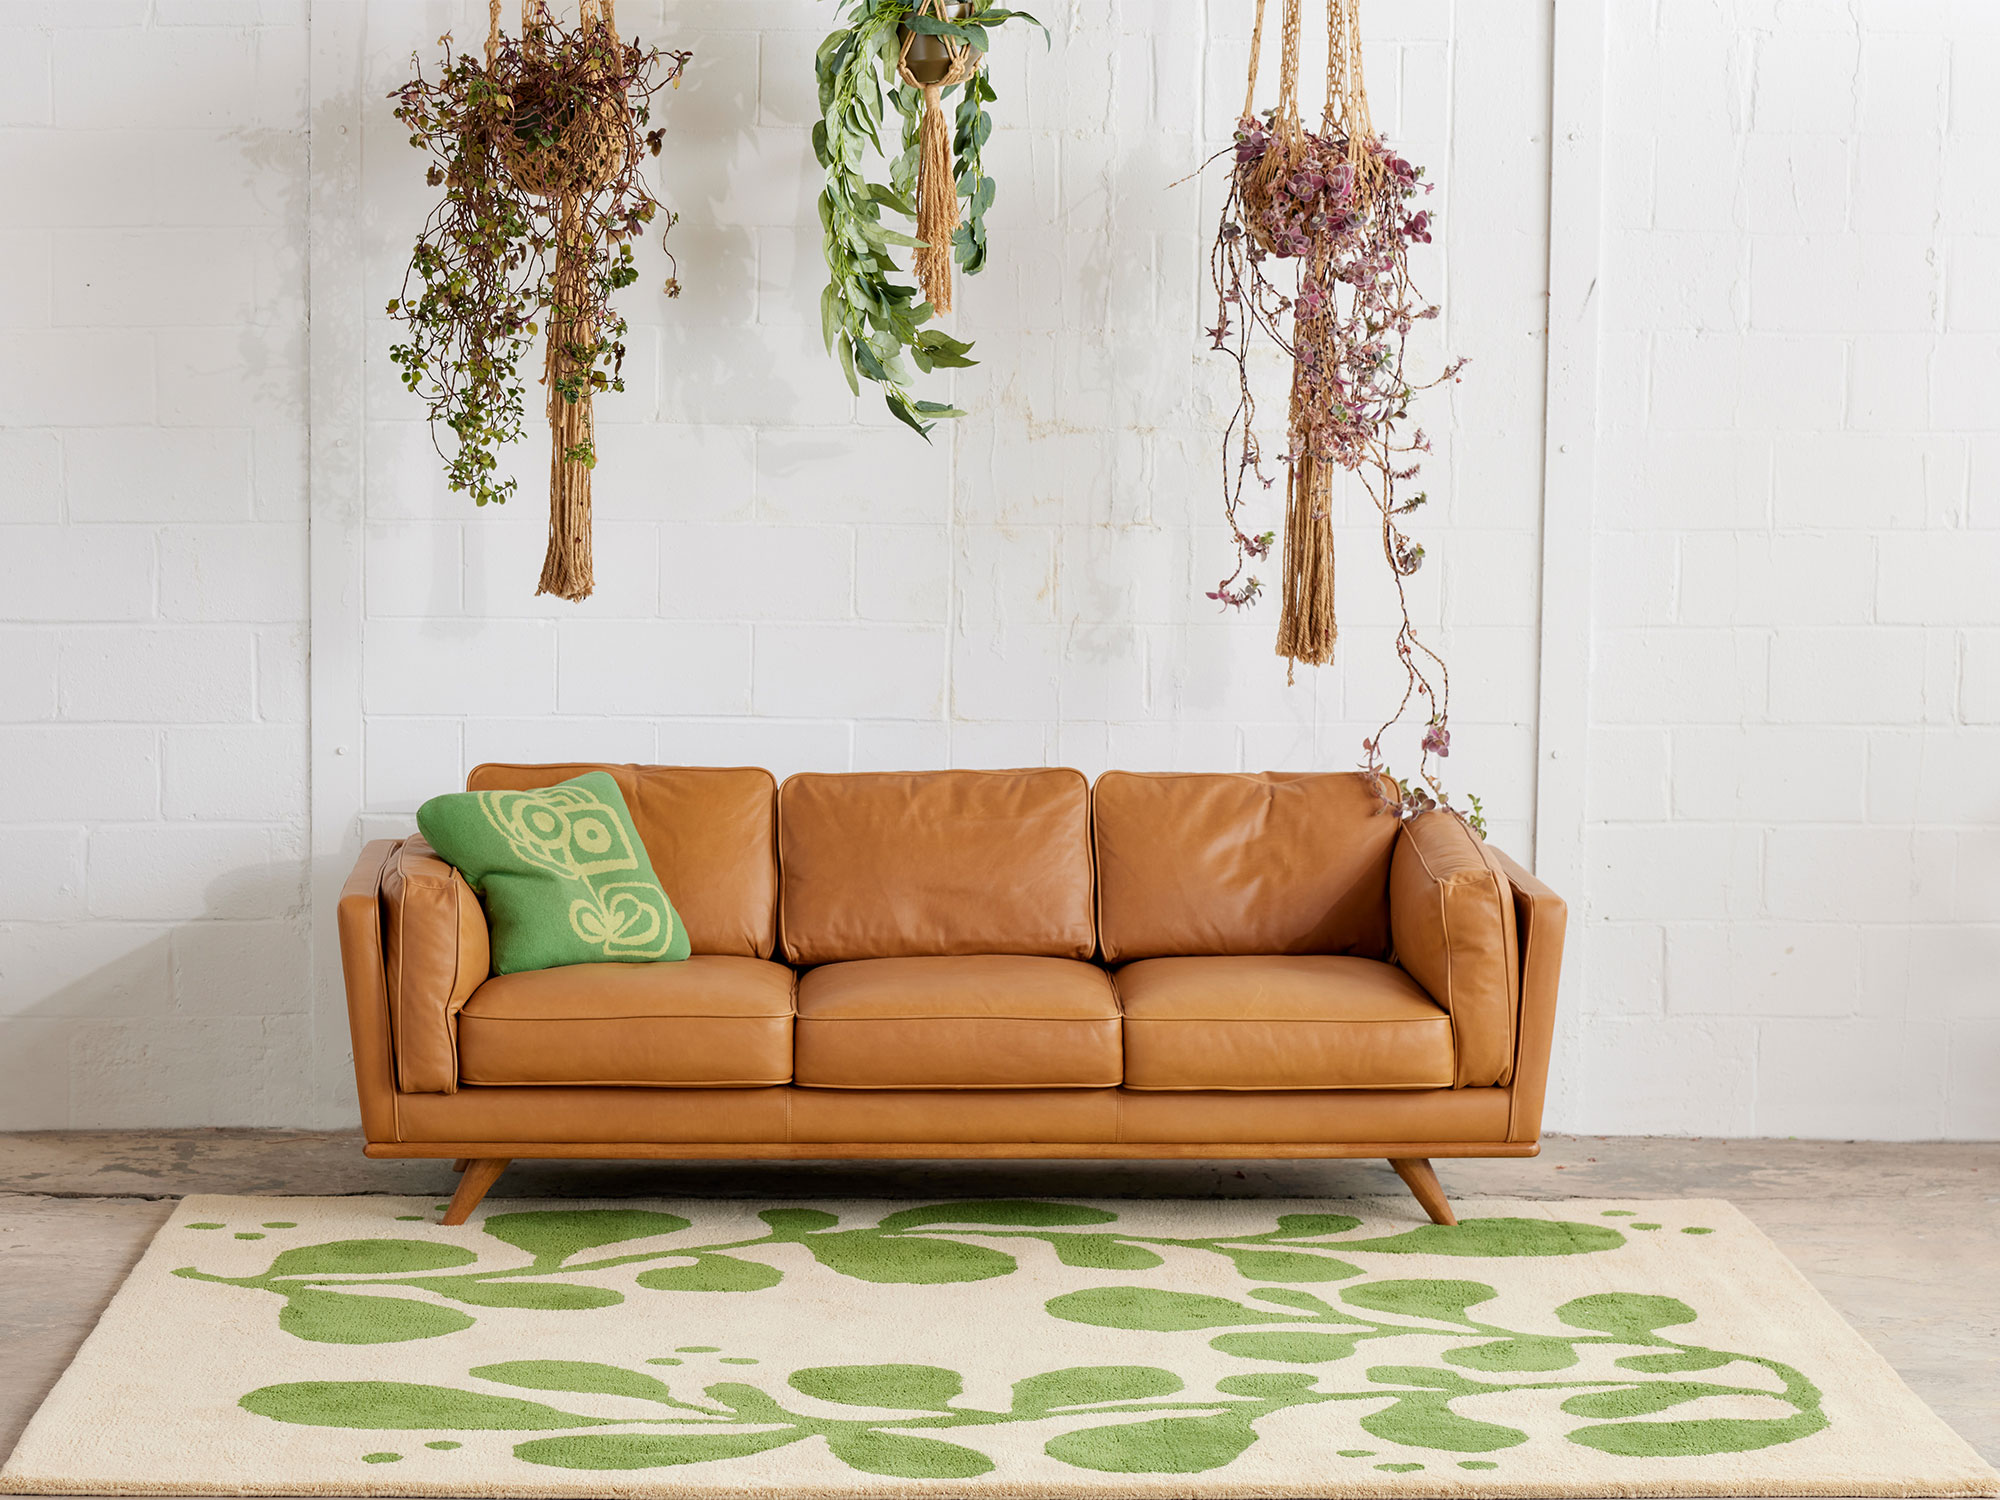 A leather sofa sits on a modern area rug called Vines Mambo by Angela Adams